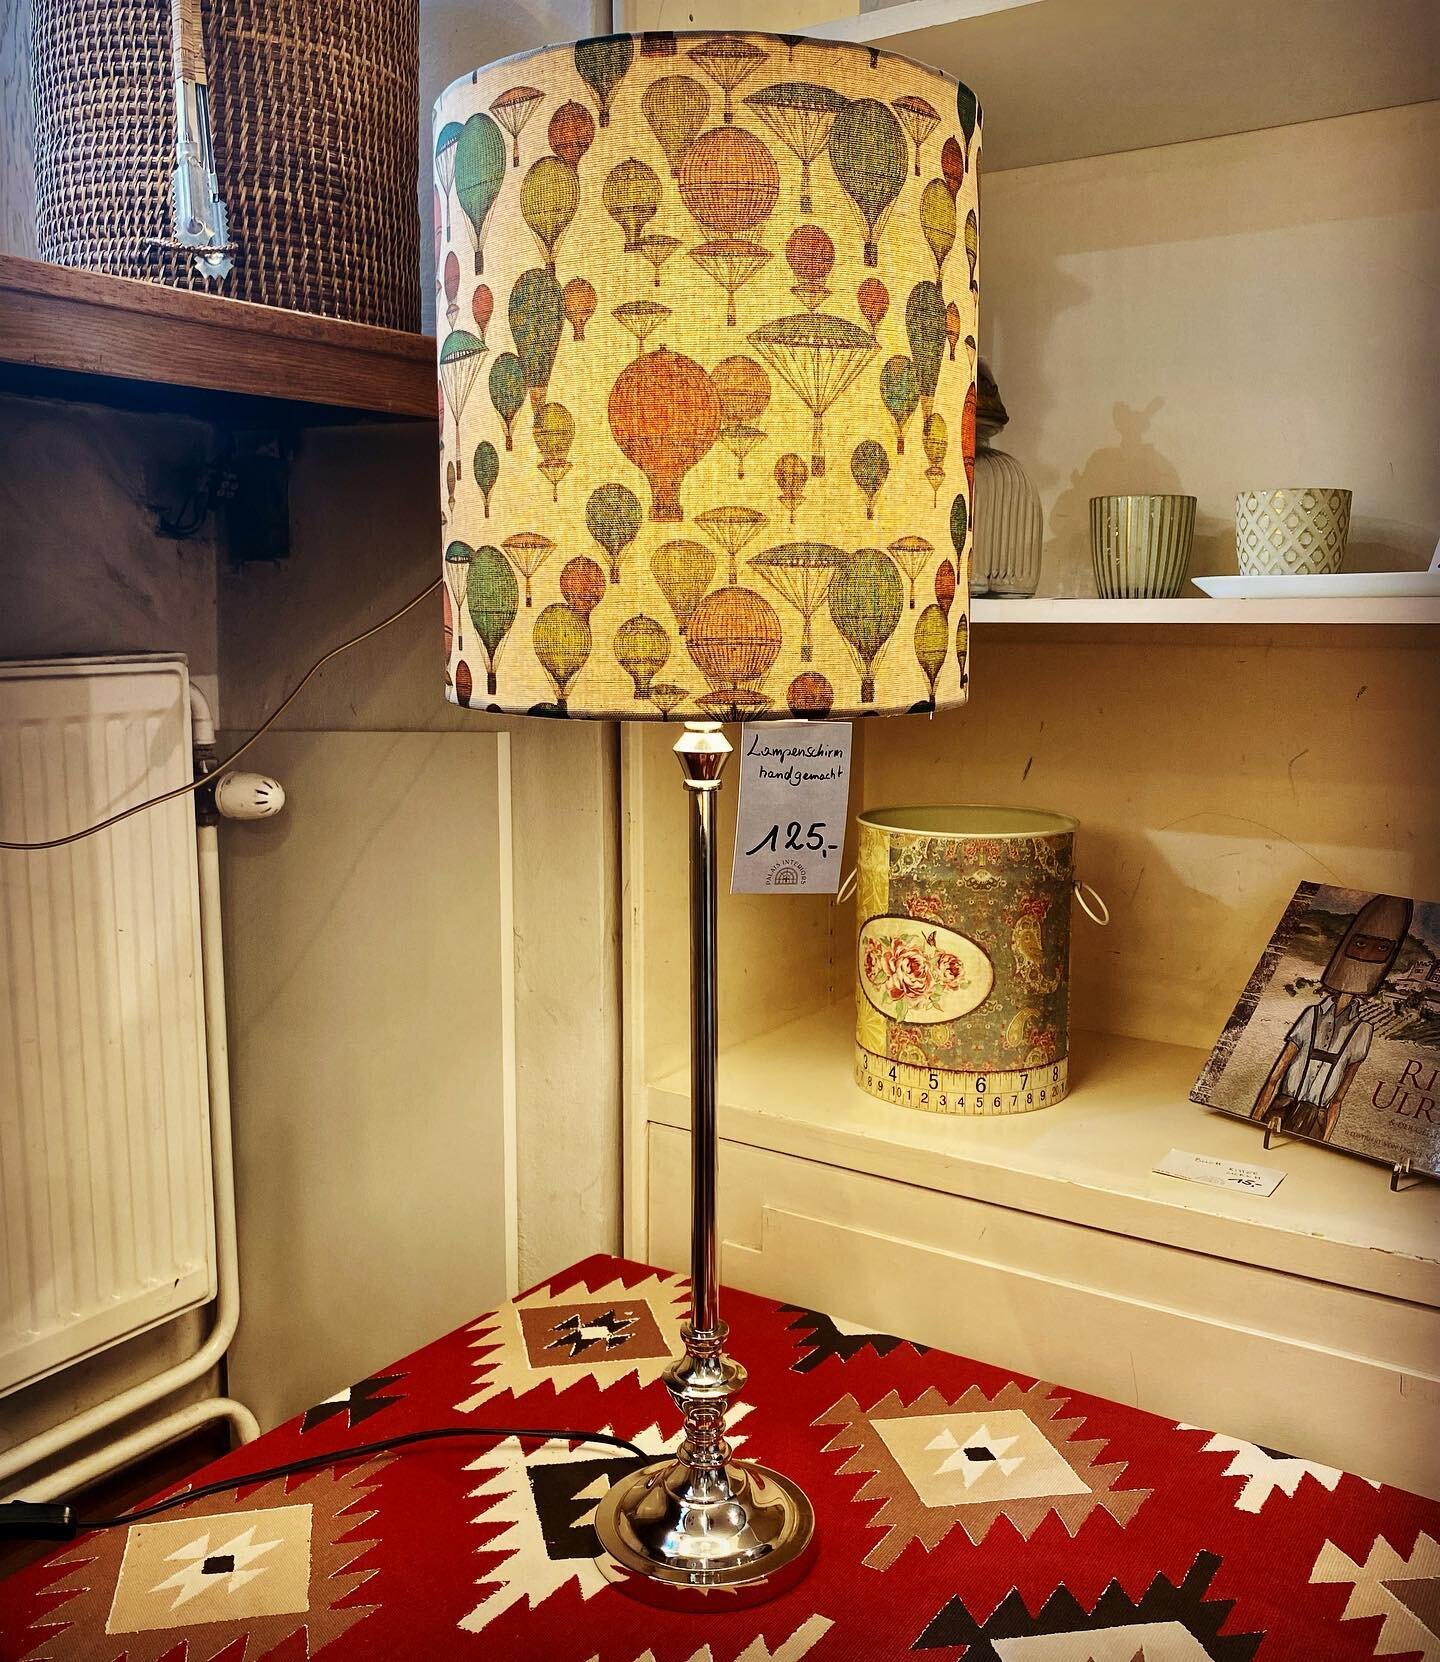 One of our newest lamps! Hot air balloon lampshade #lamp #lampshade #vienna #interiordesign